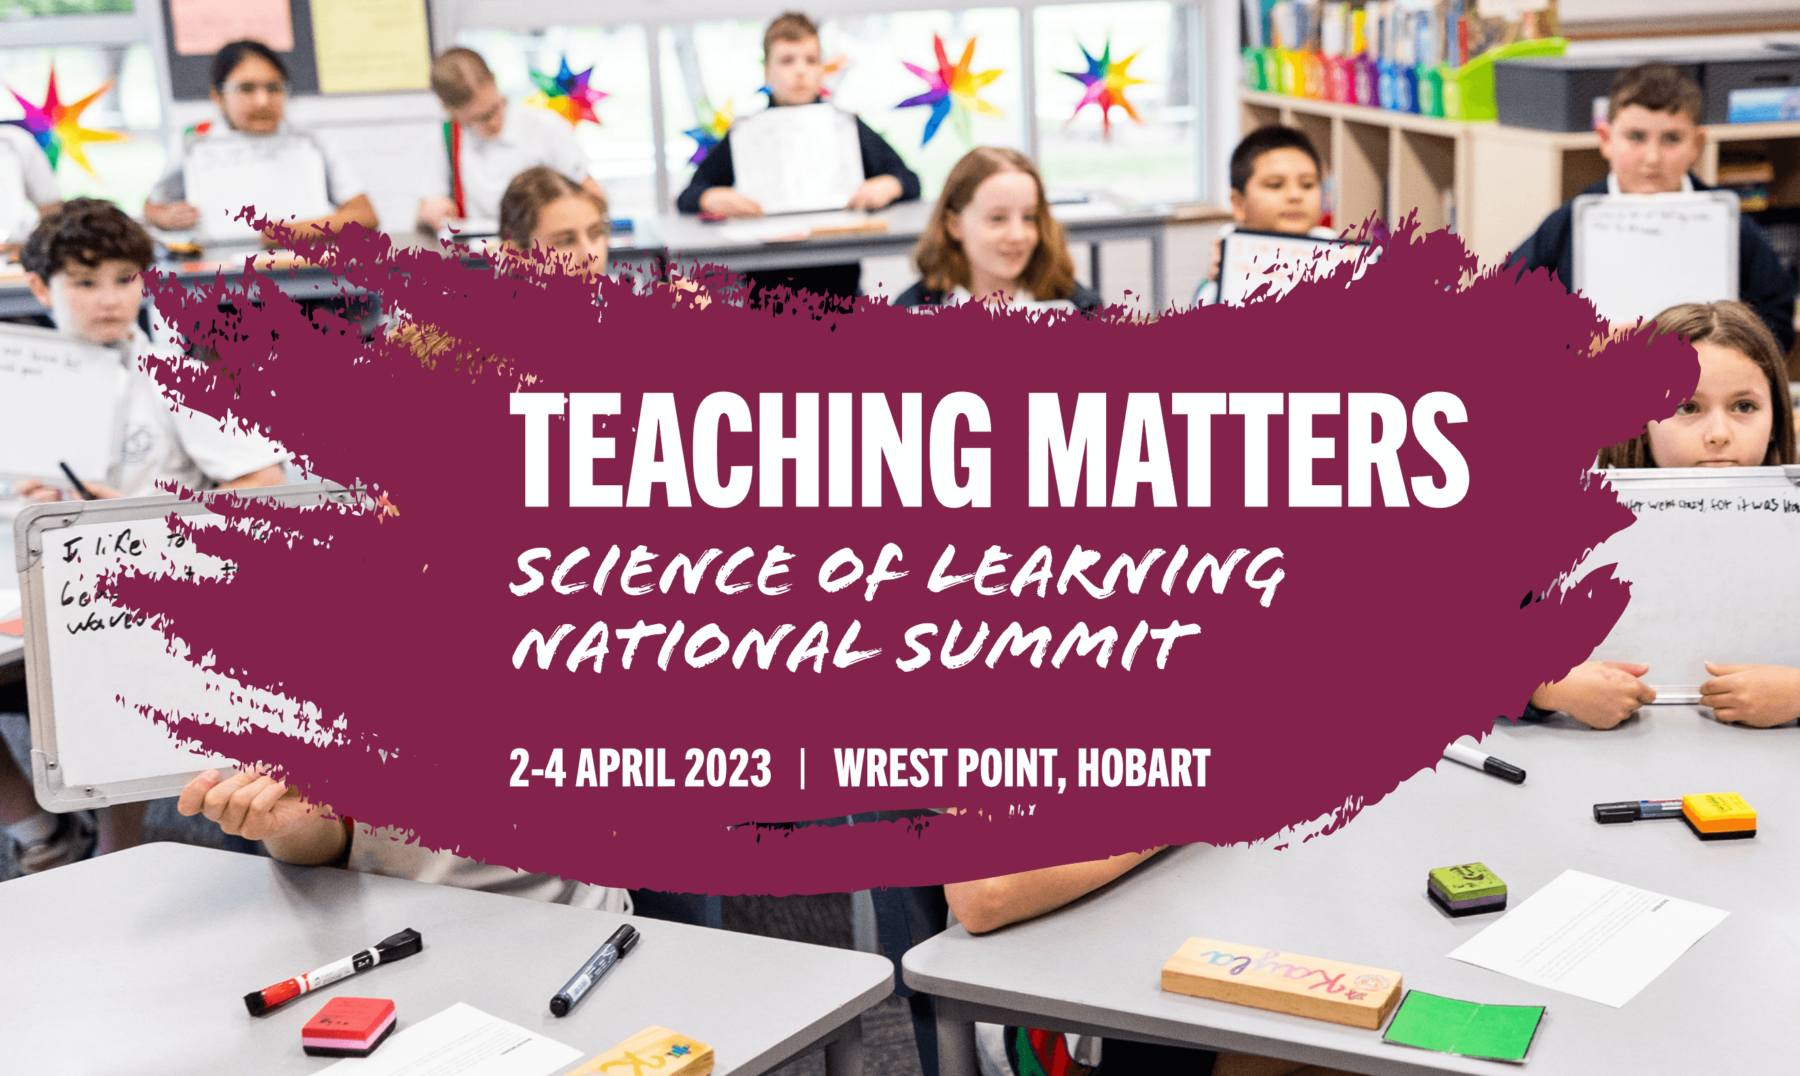 A promotional banner image with information about a conference shown in front of a classroom of younger children holding up pieces of paper.